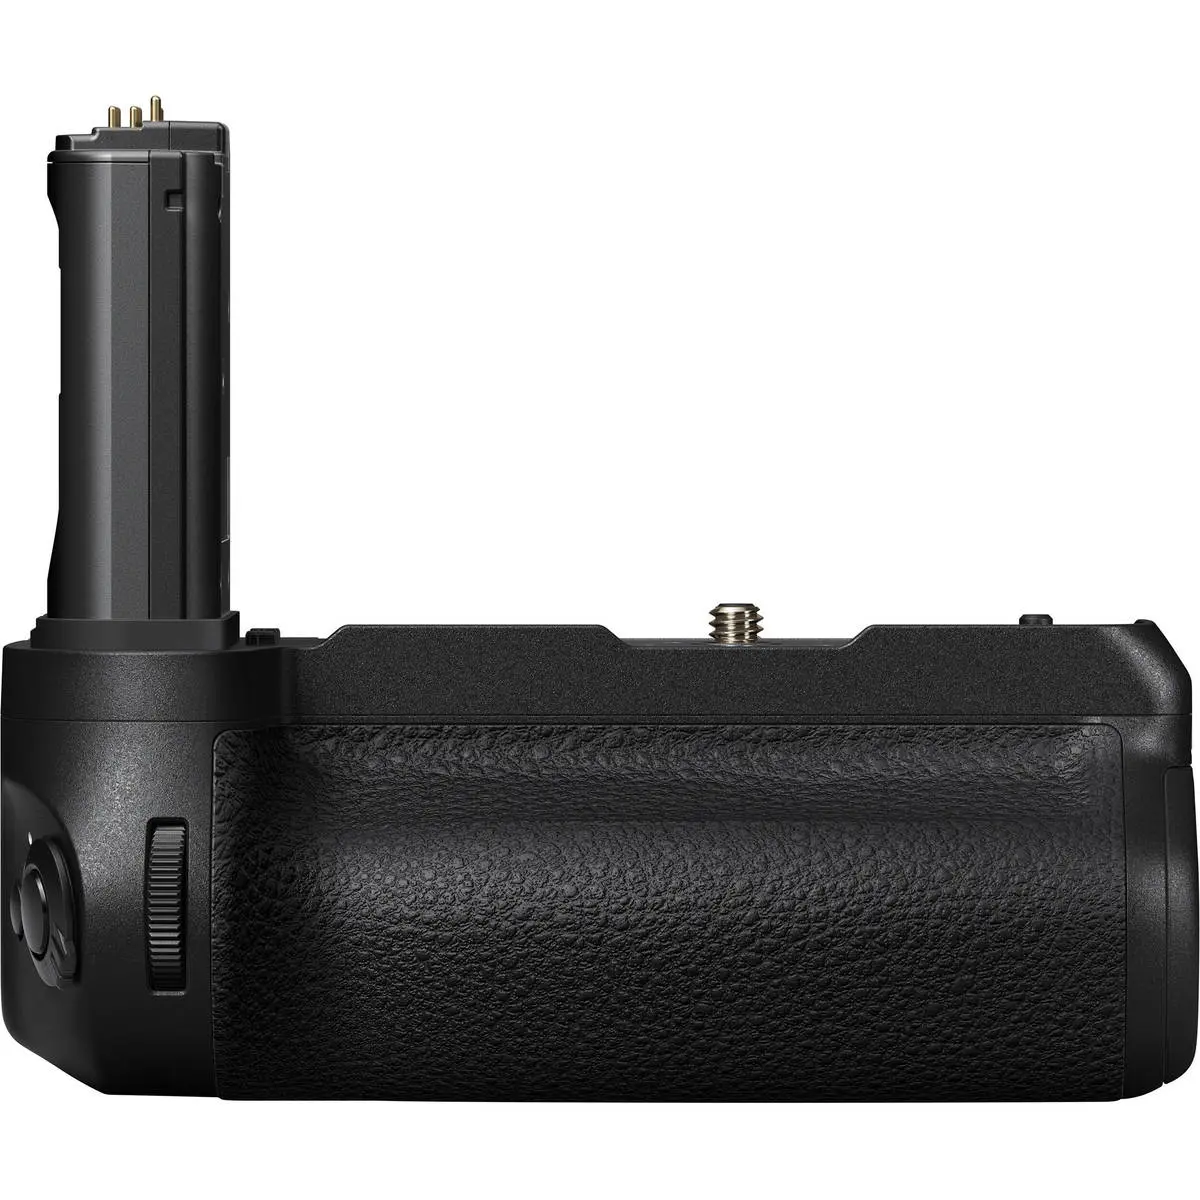 Main Image Nikon MB-N11 Power Battery Pack with Vertical Grip